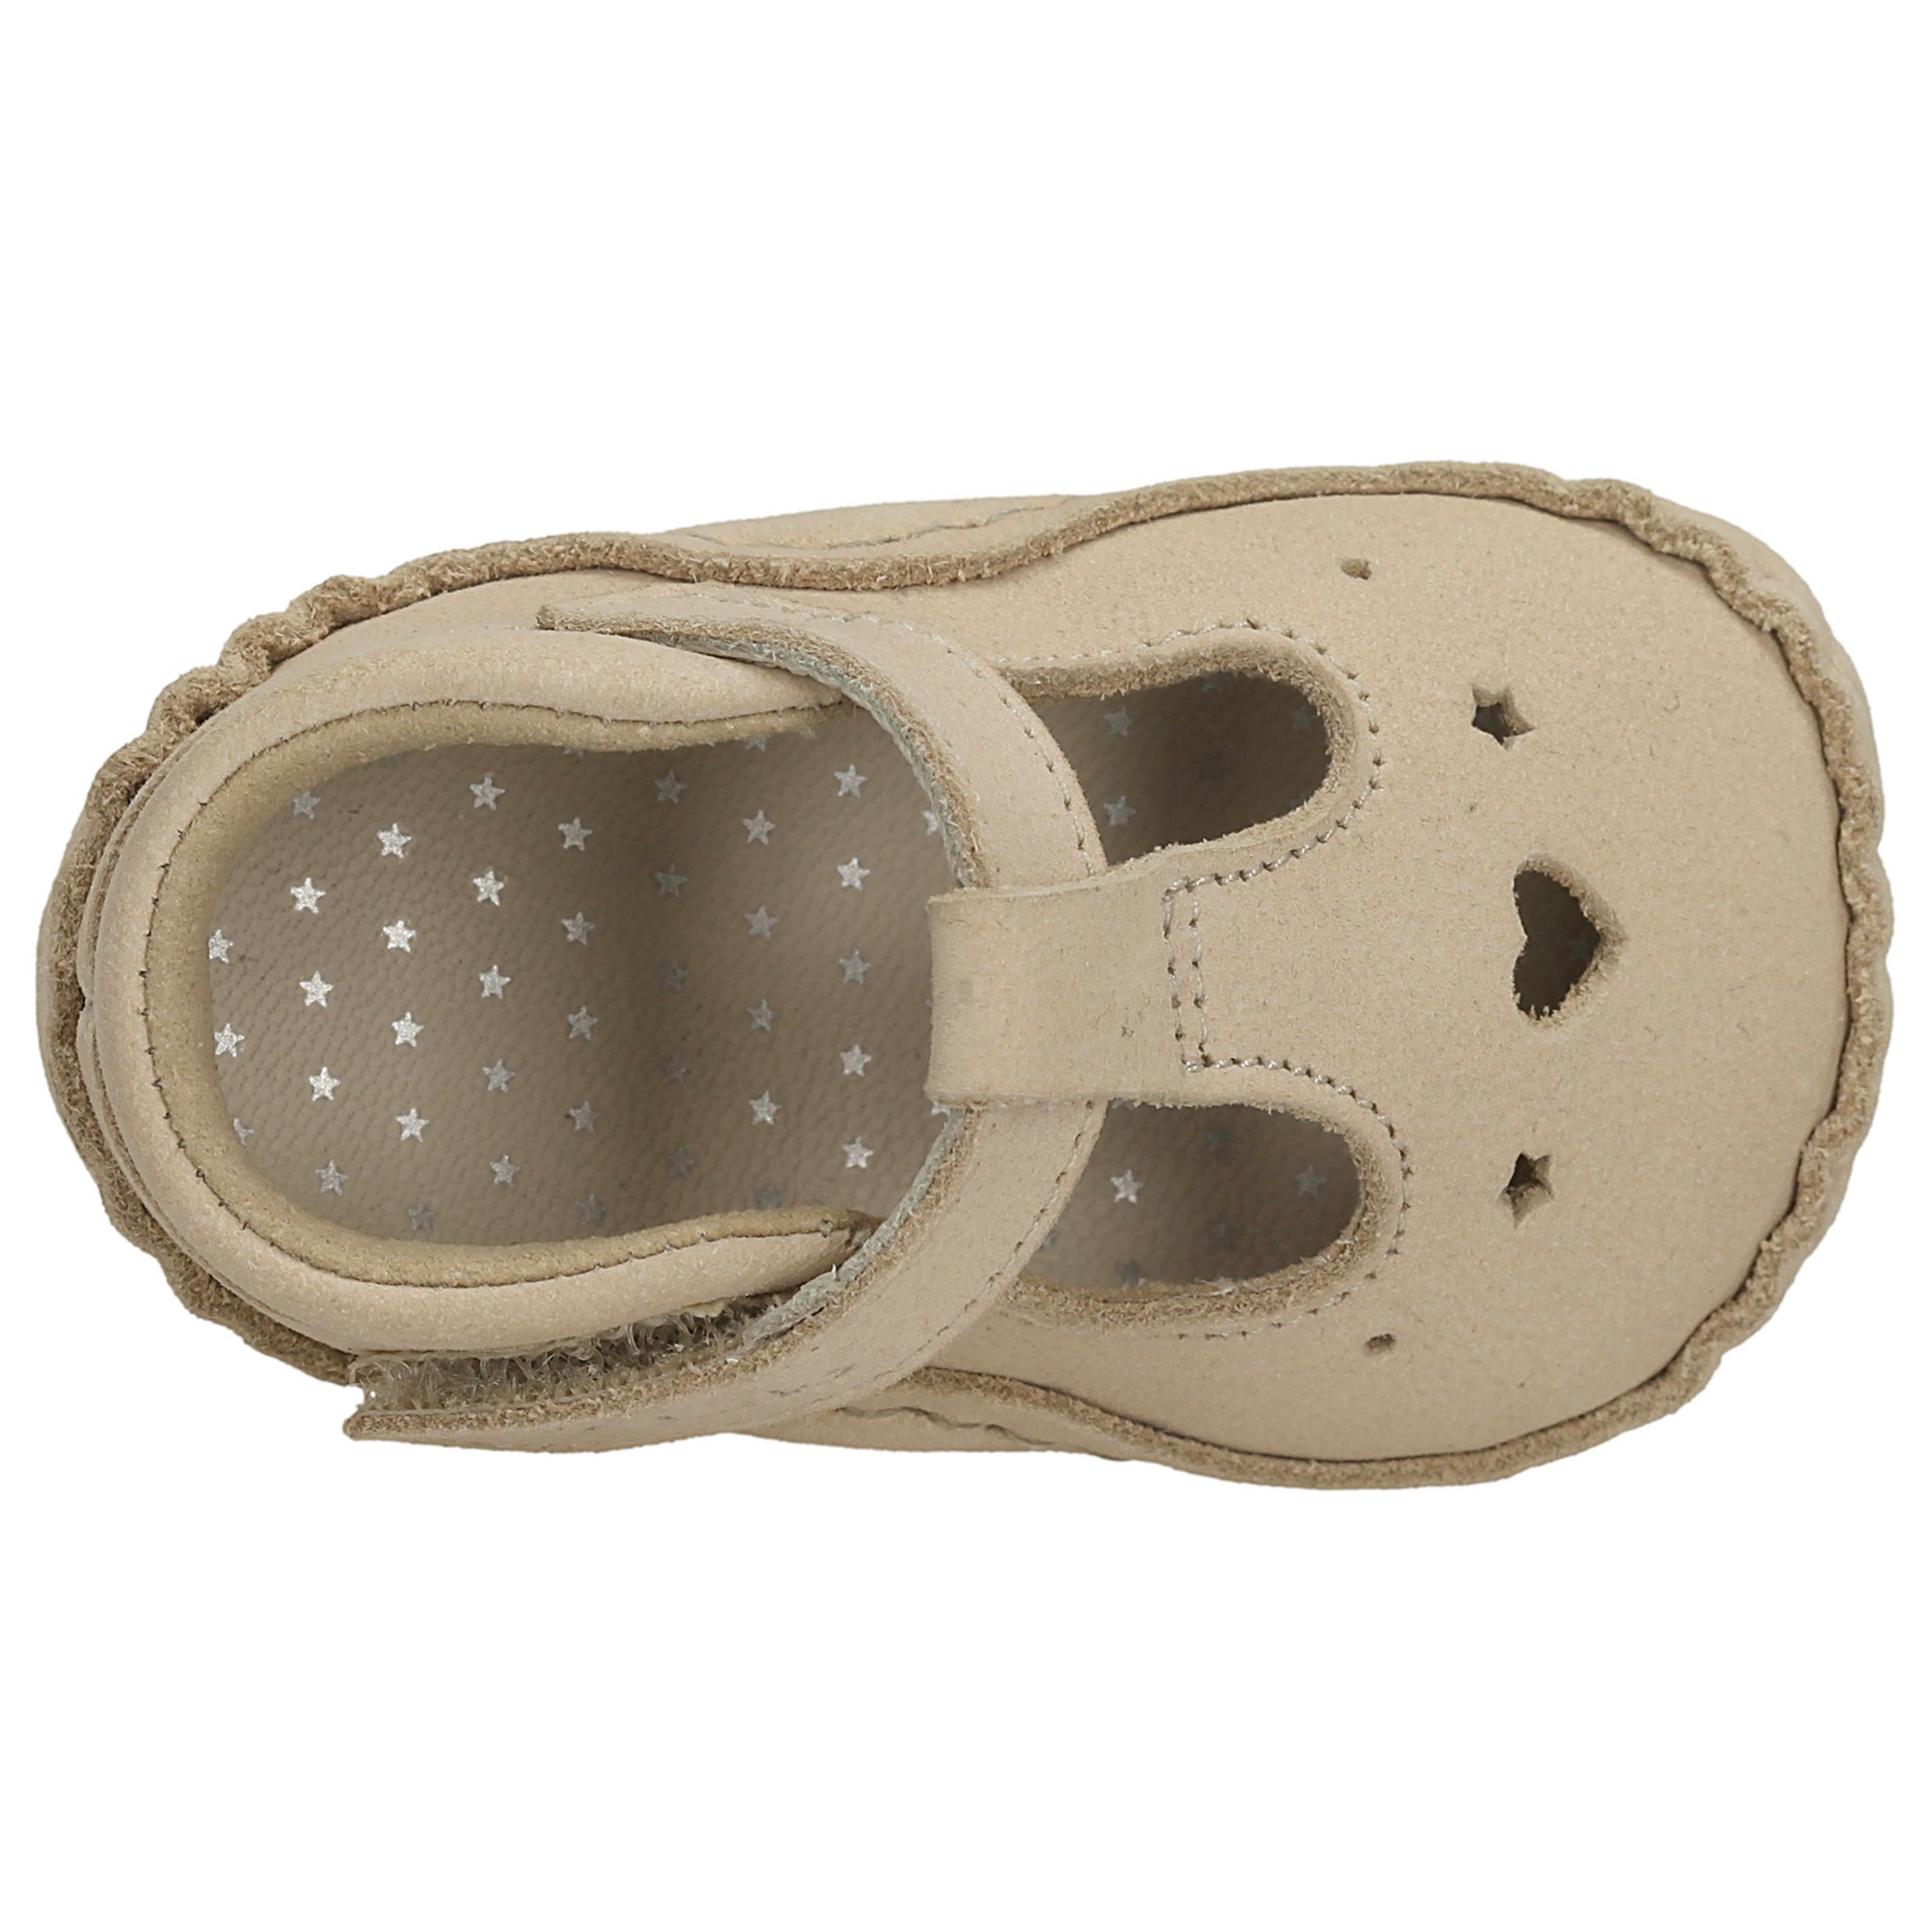 Clarks Baby Toy Pre-Walker Shoes, Cream 